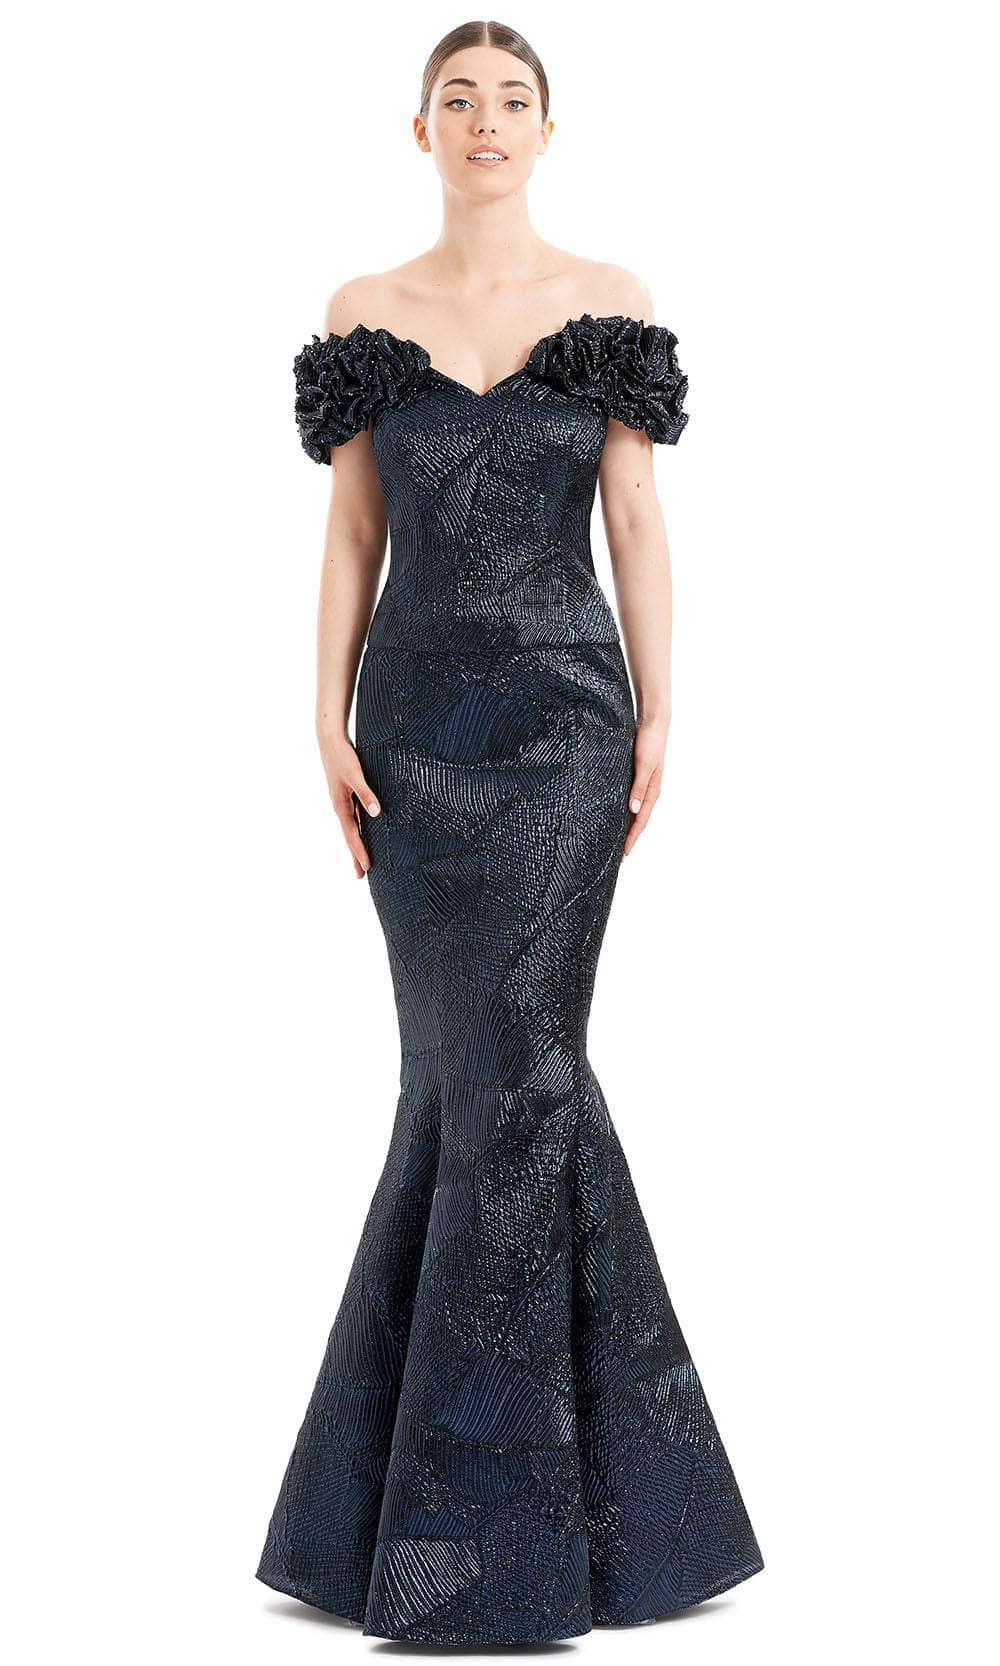 Alexander By Daymor 1650F22 - Ruffled Sleeve Metallic Evening Gown Special Occasion Dress 4 / Navy